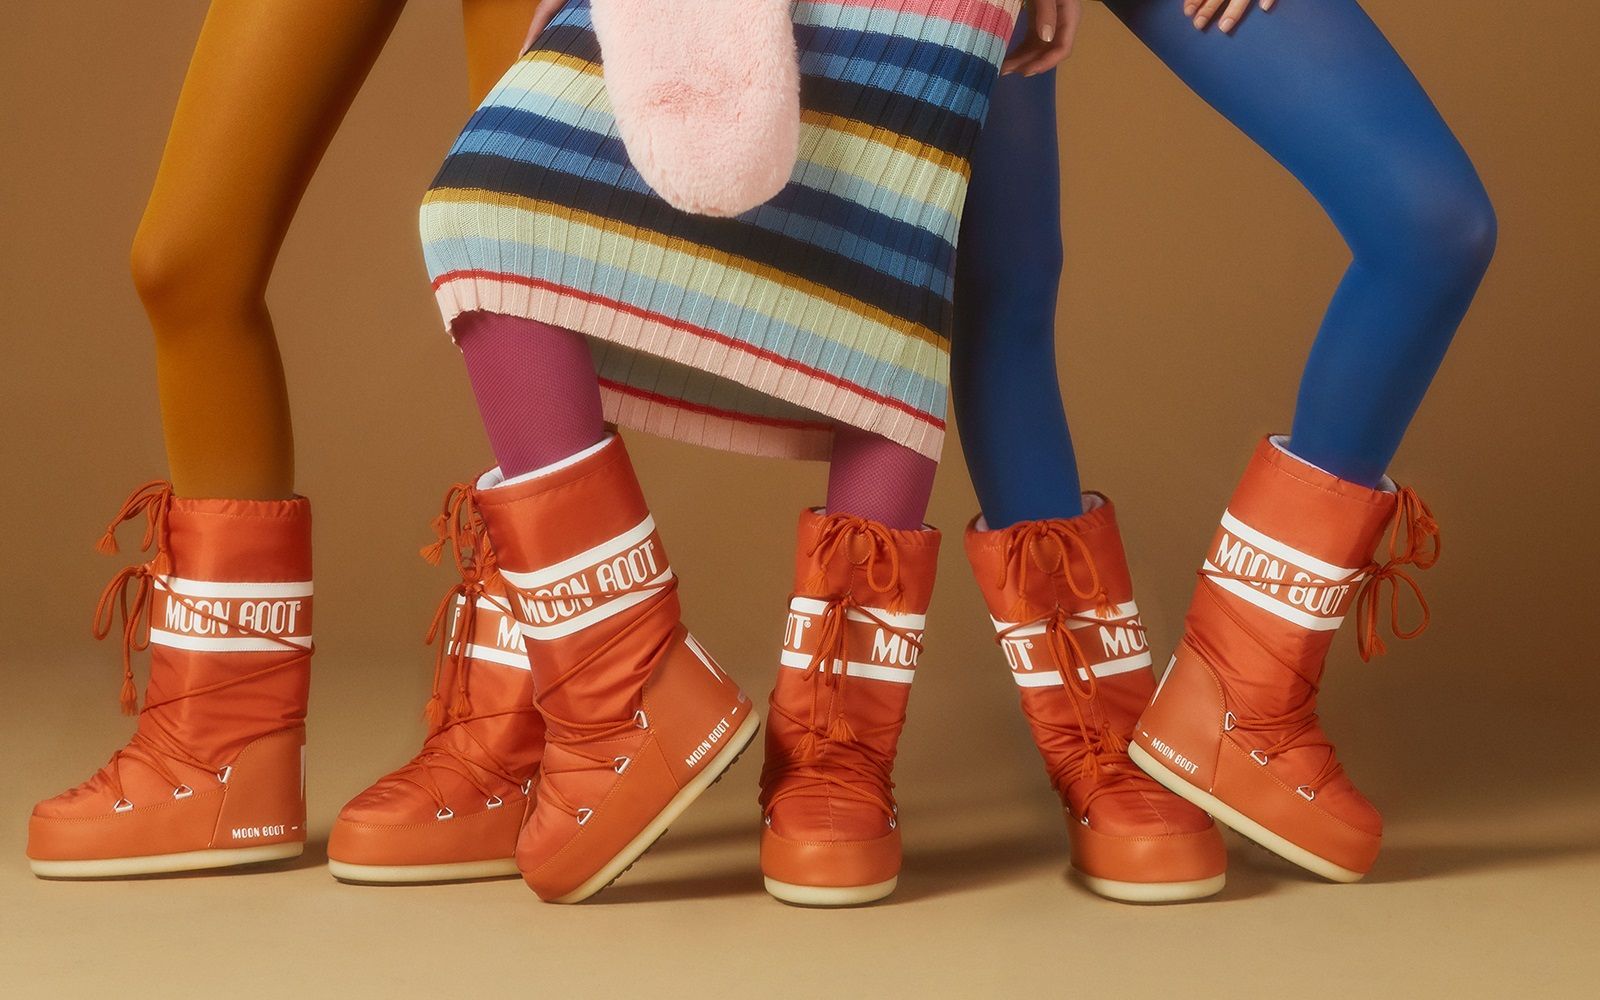 Moon Boot Unveils Two New Iconic Styles in 'The Preview Collection